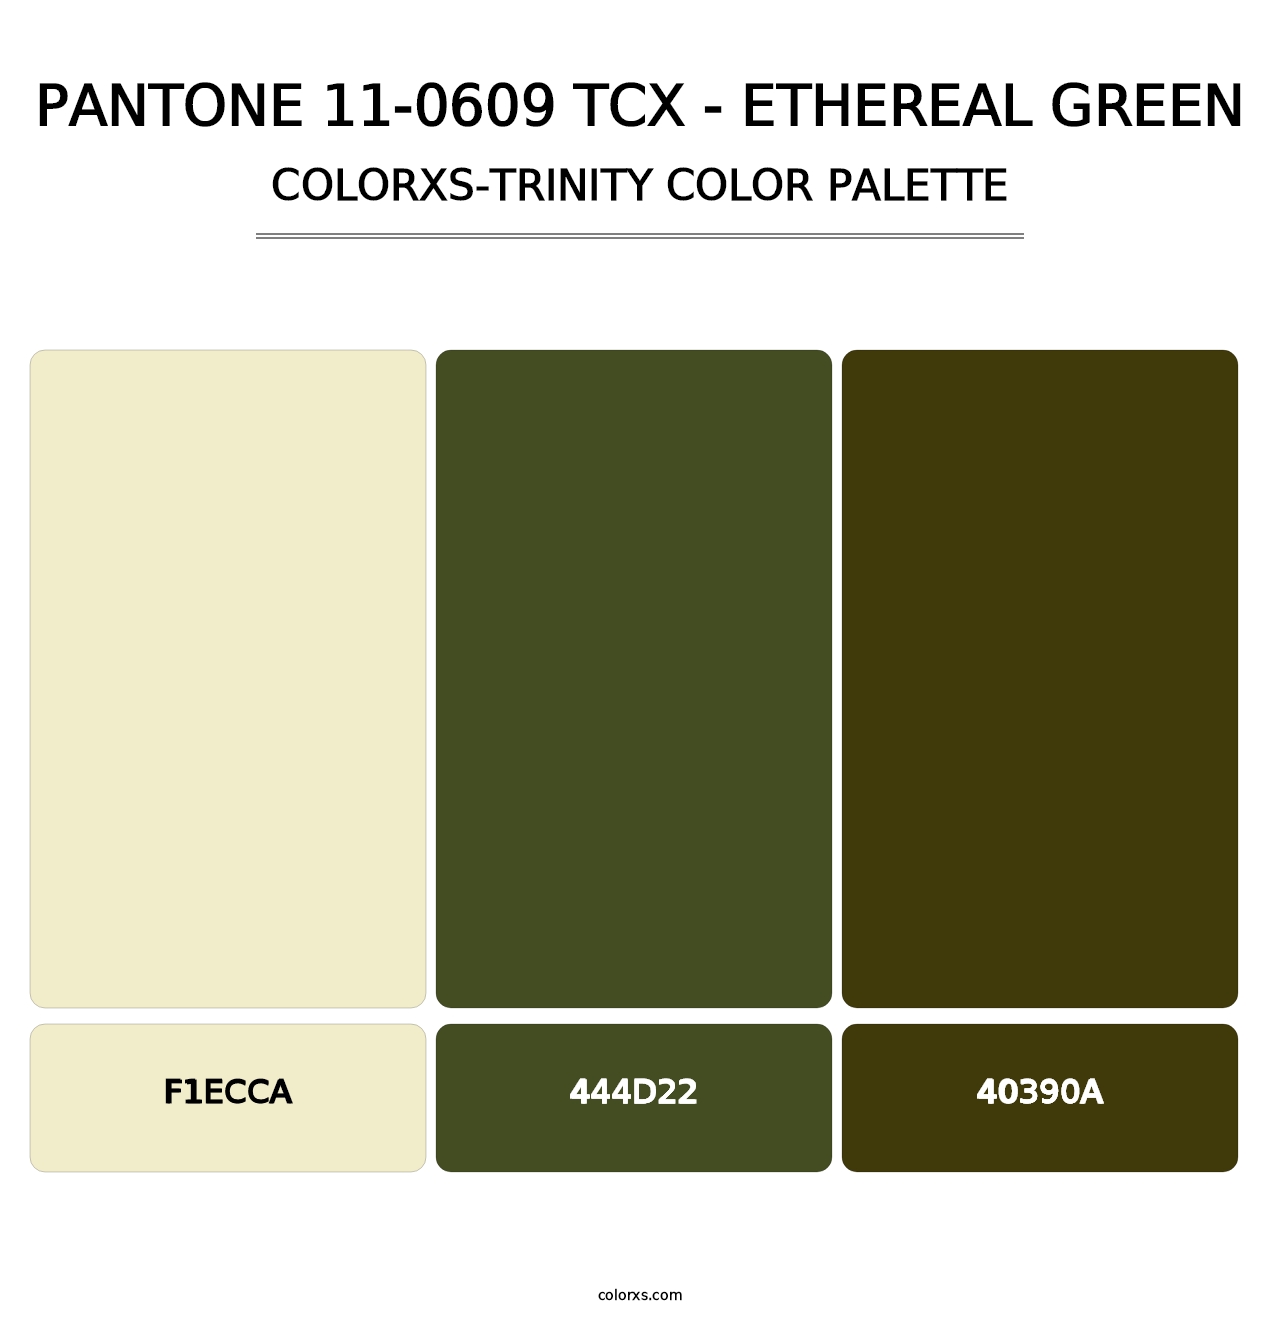 PANTONE 11-0609 TCX - Ethereal Green - Colorxs Trinity Palette